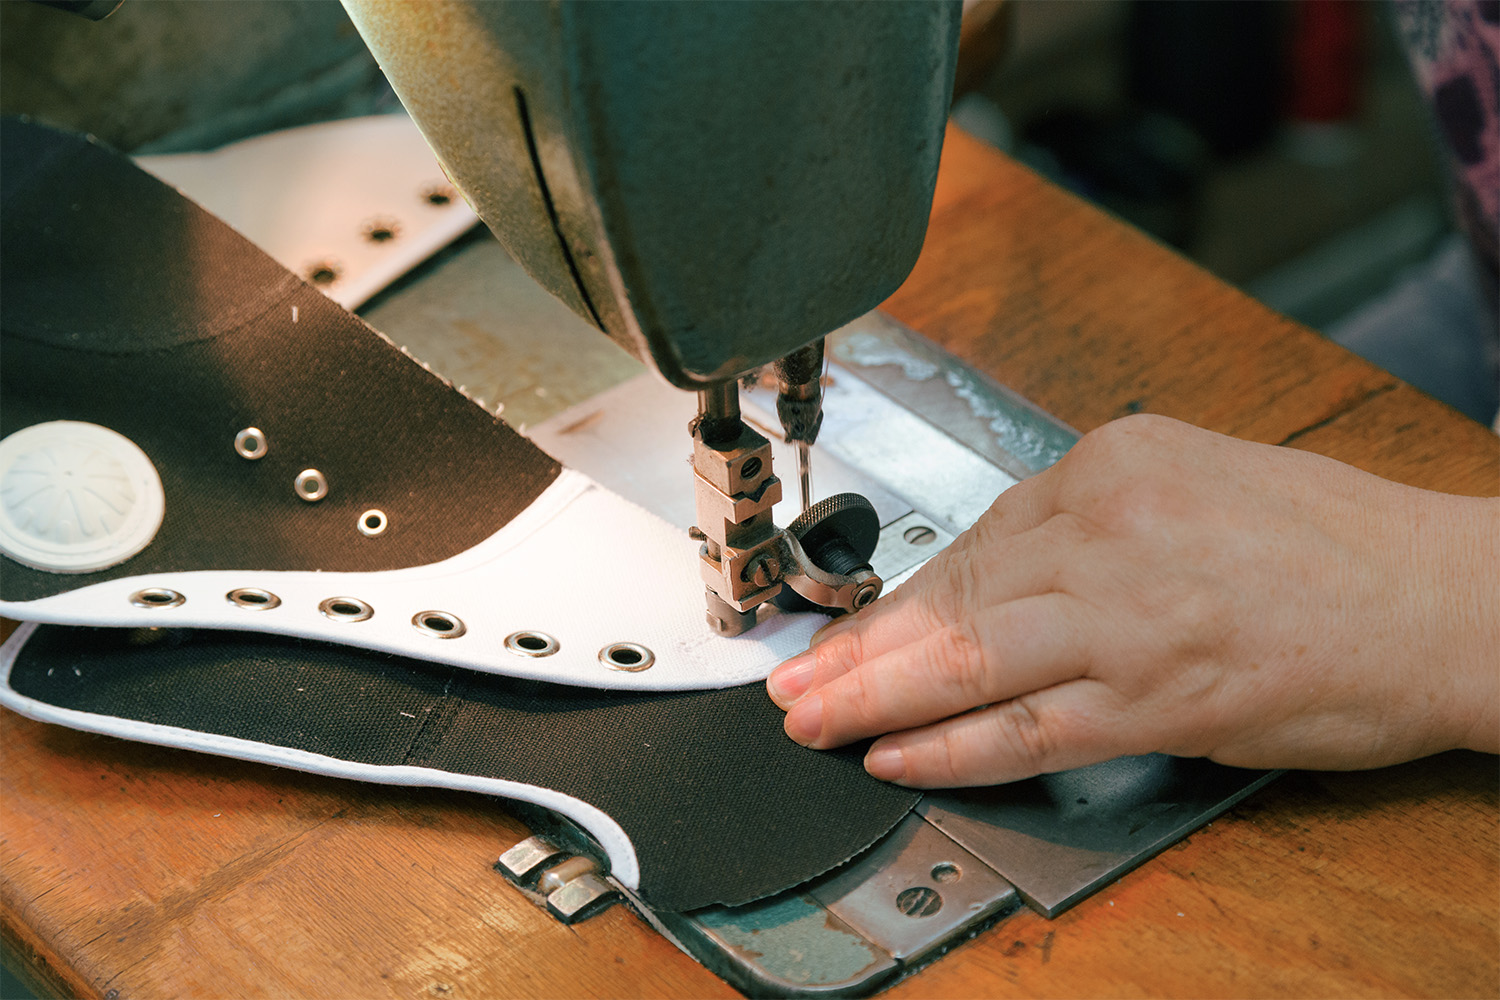 The shoe is built and stitched in differerent fases. A co-worker is stitching the front tip of the shoe.